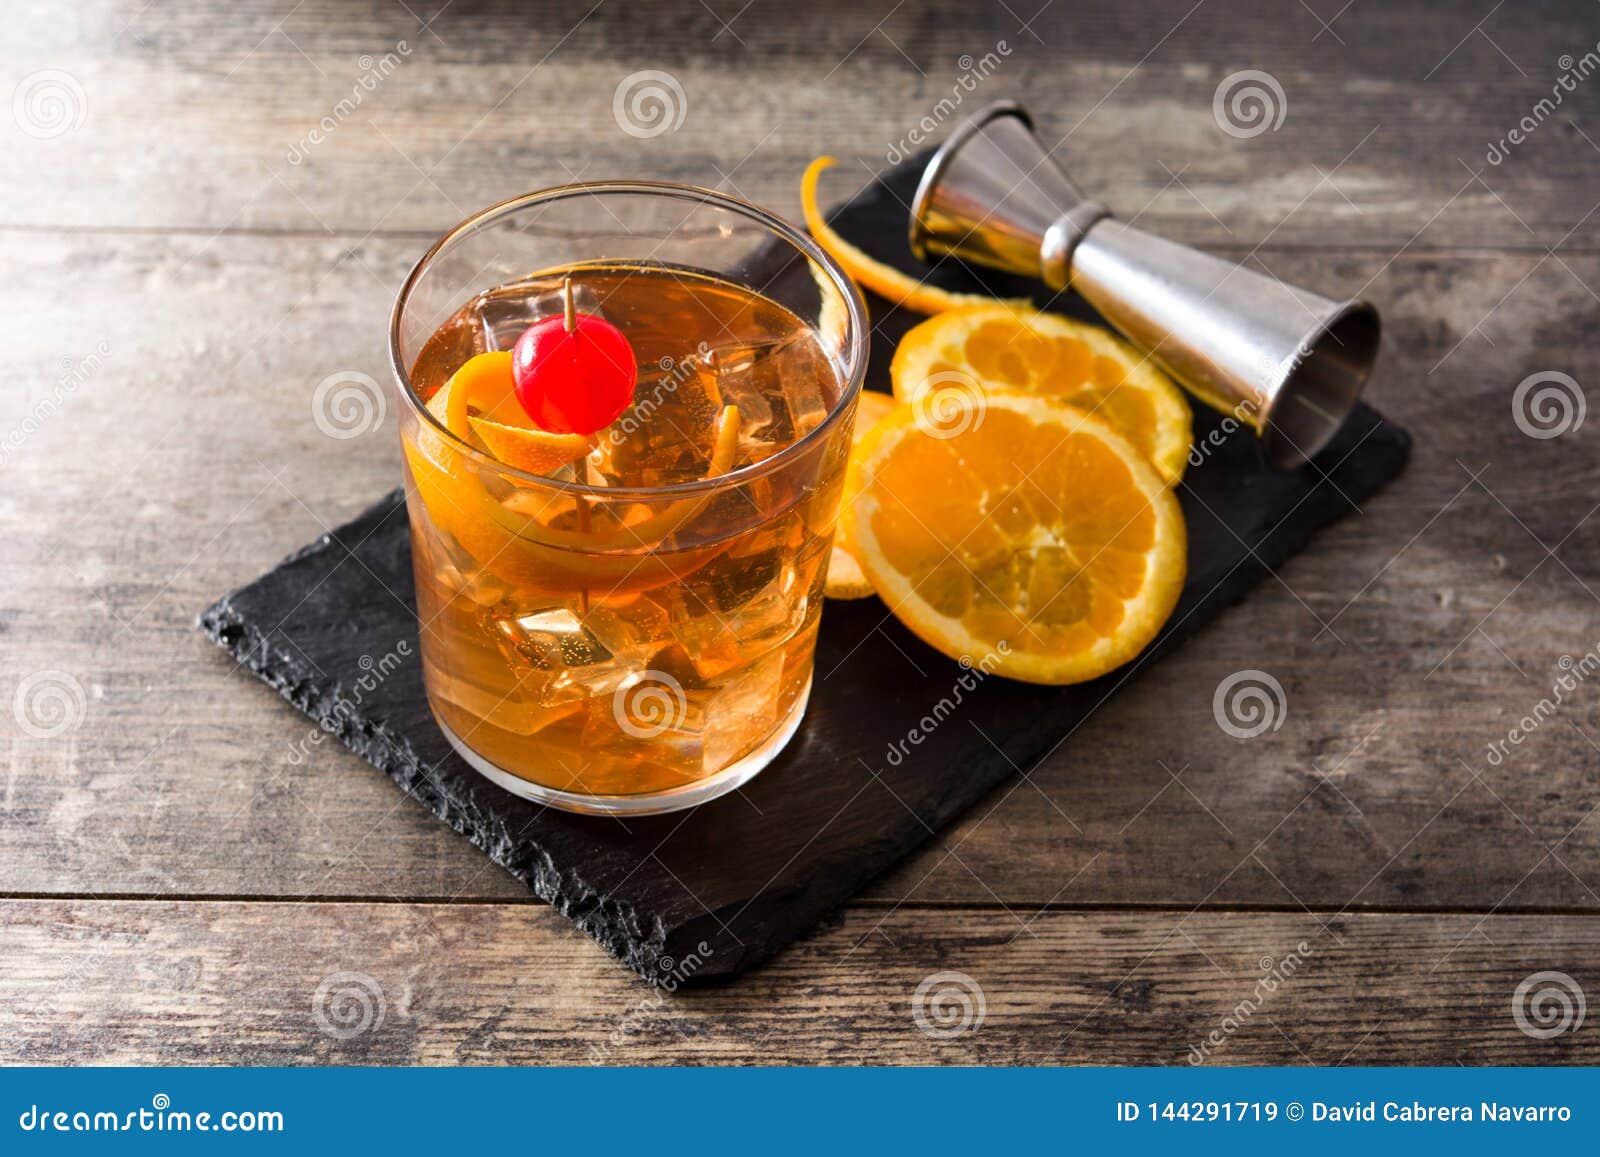 old fashioned cocktail with orange and cherry on wooden table